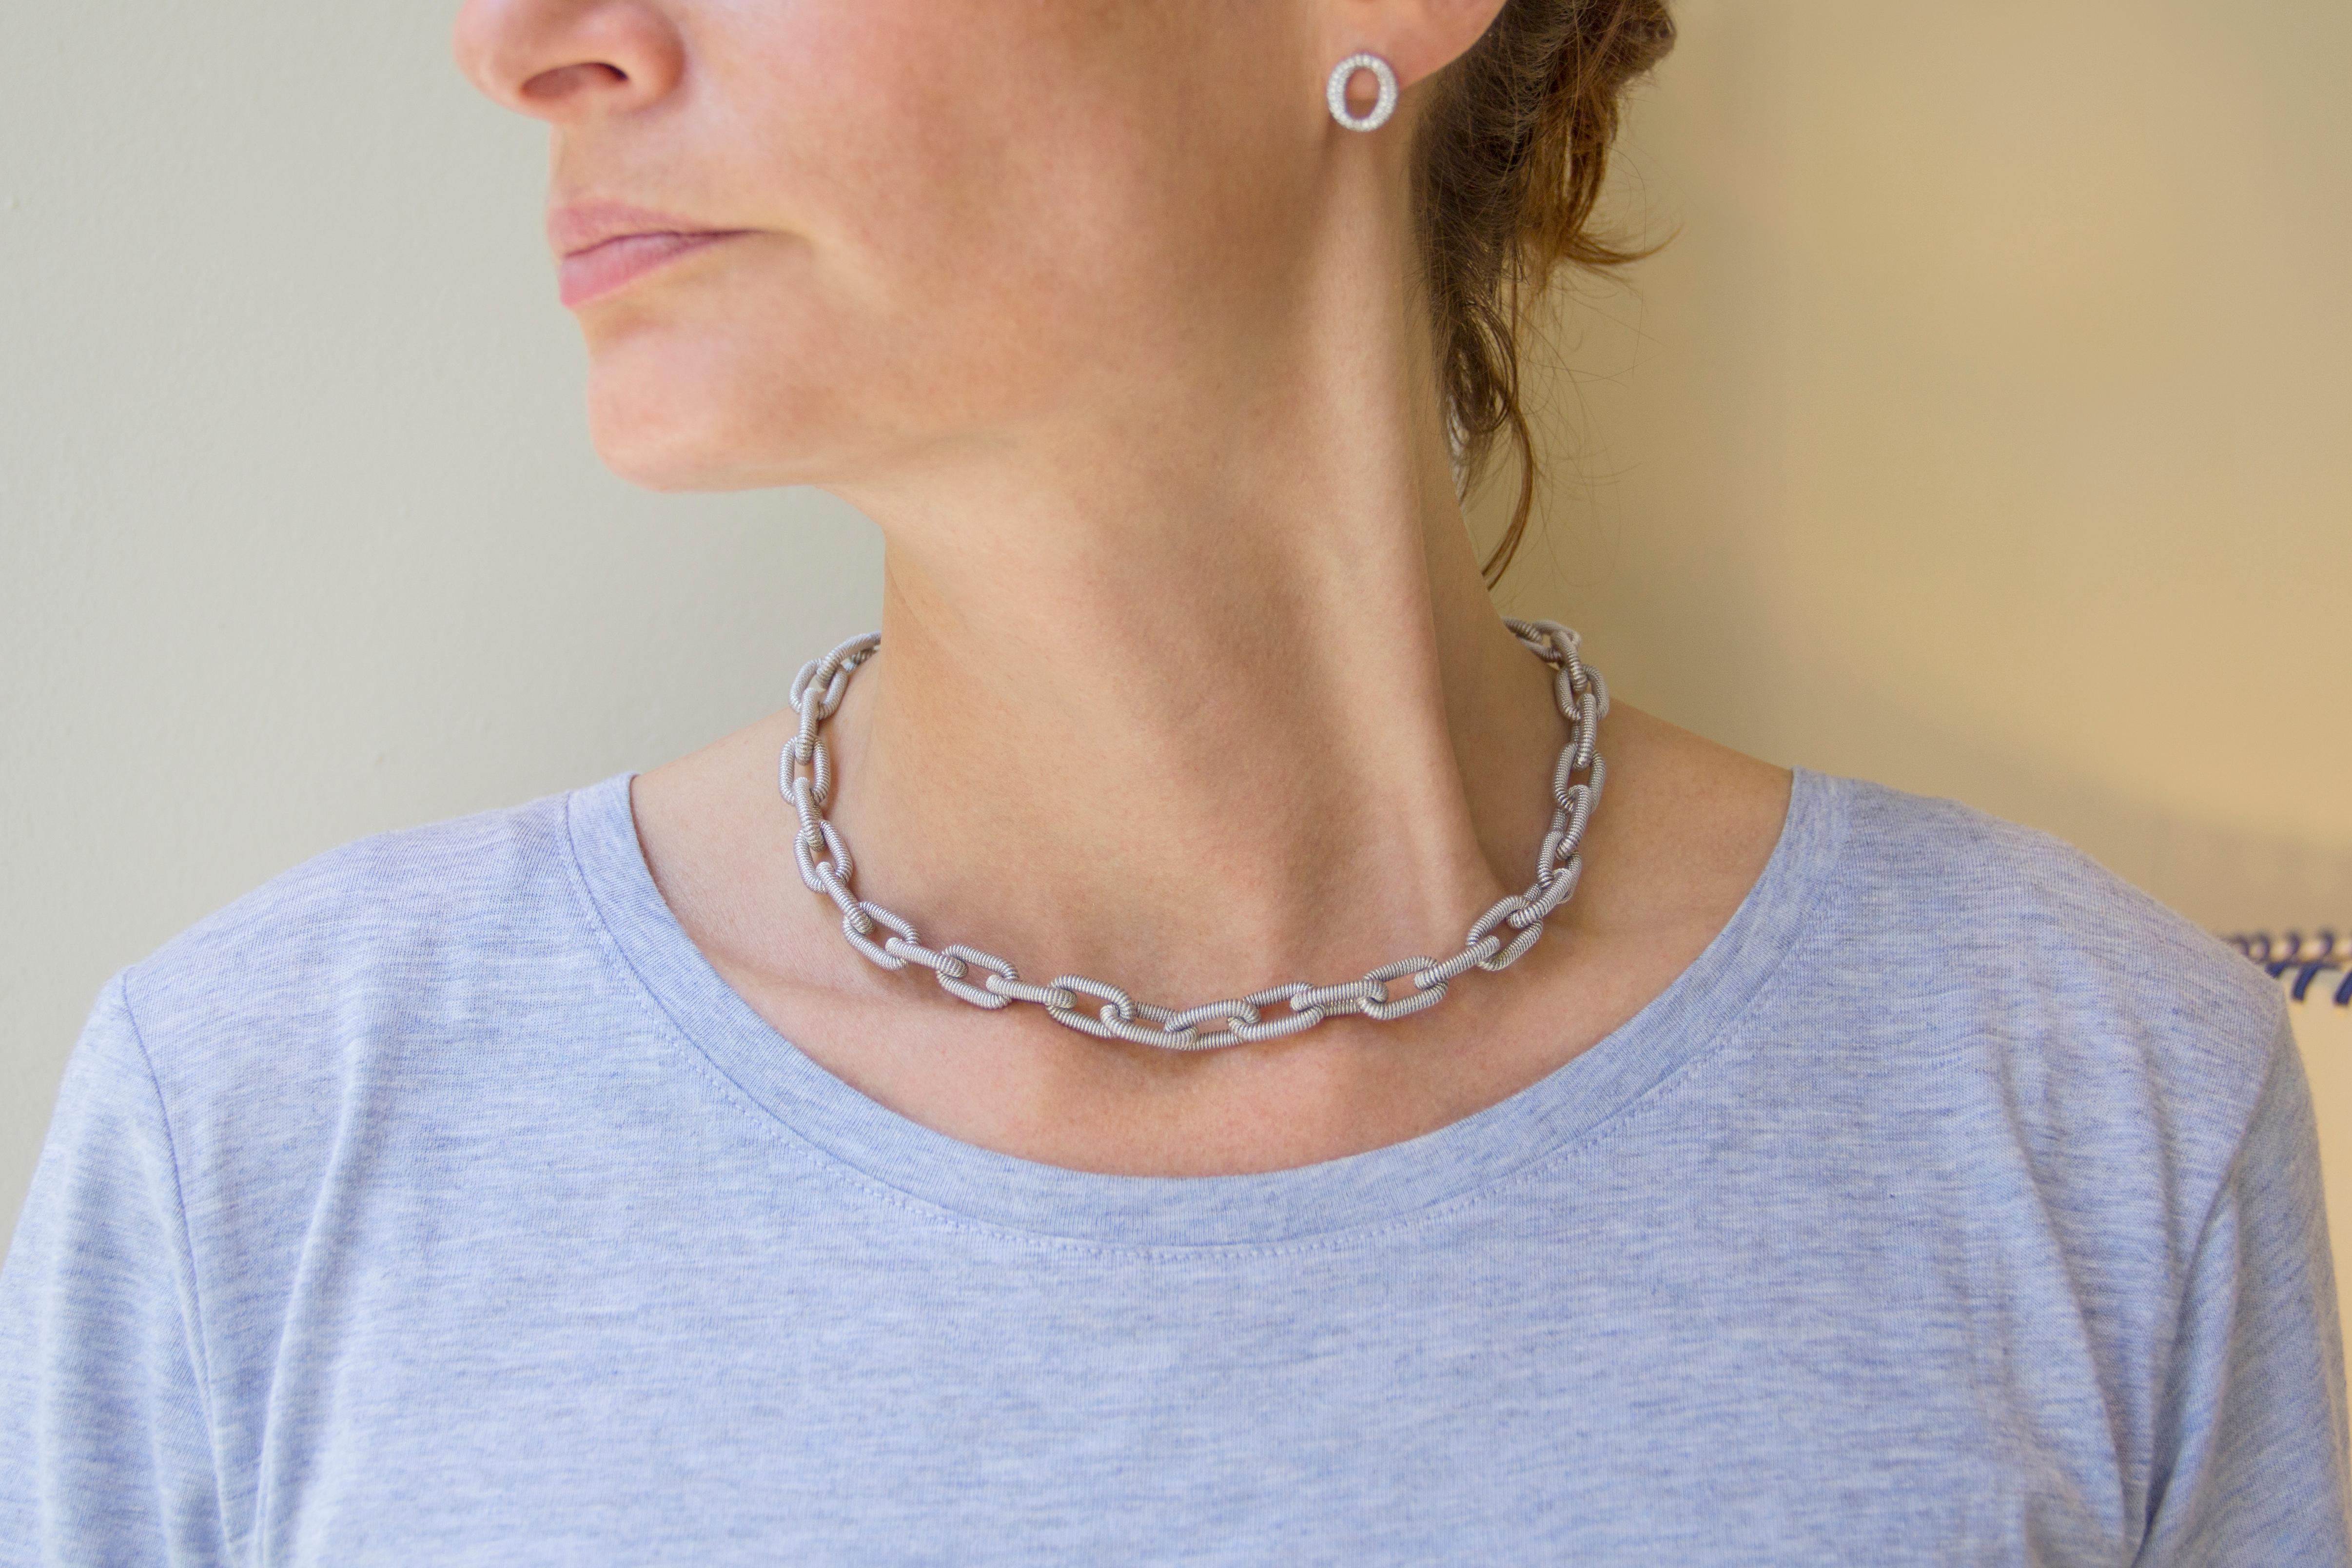 Jona design collection, hand crafted in Italy, rhodium plated sterling silver twisted wire necklace. Marked Jona.
Dimensions: L 17.32 in x W 0.36 in x D 0.11 in - L 44 cm x W 9.26 mm x D 2.97 mm
All Jona jewelry is new and has never been previously